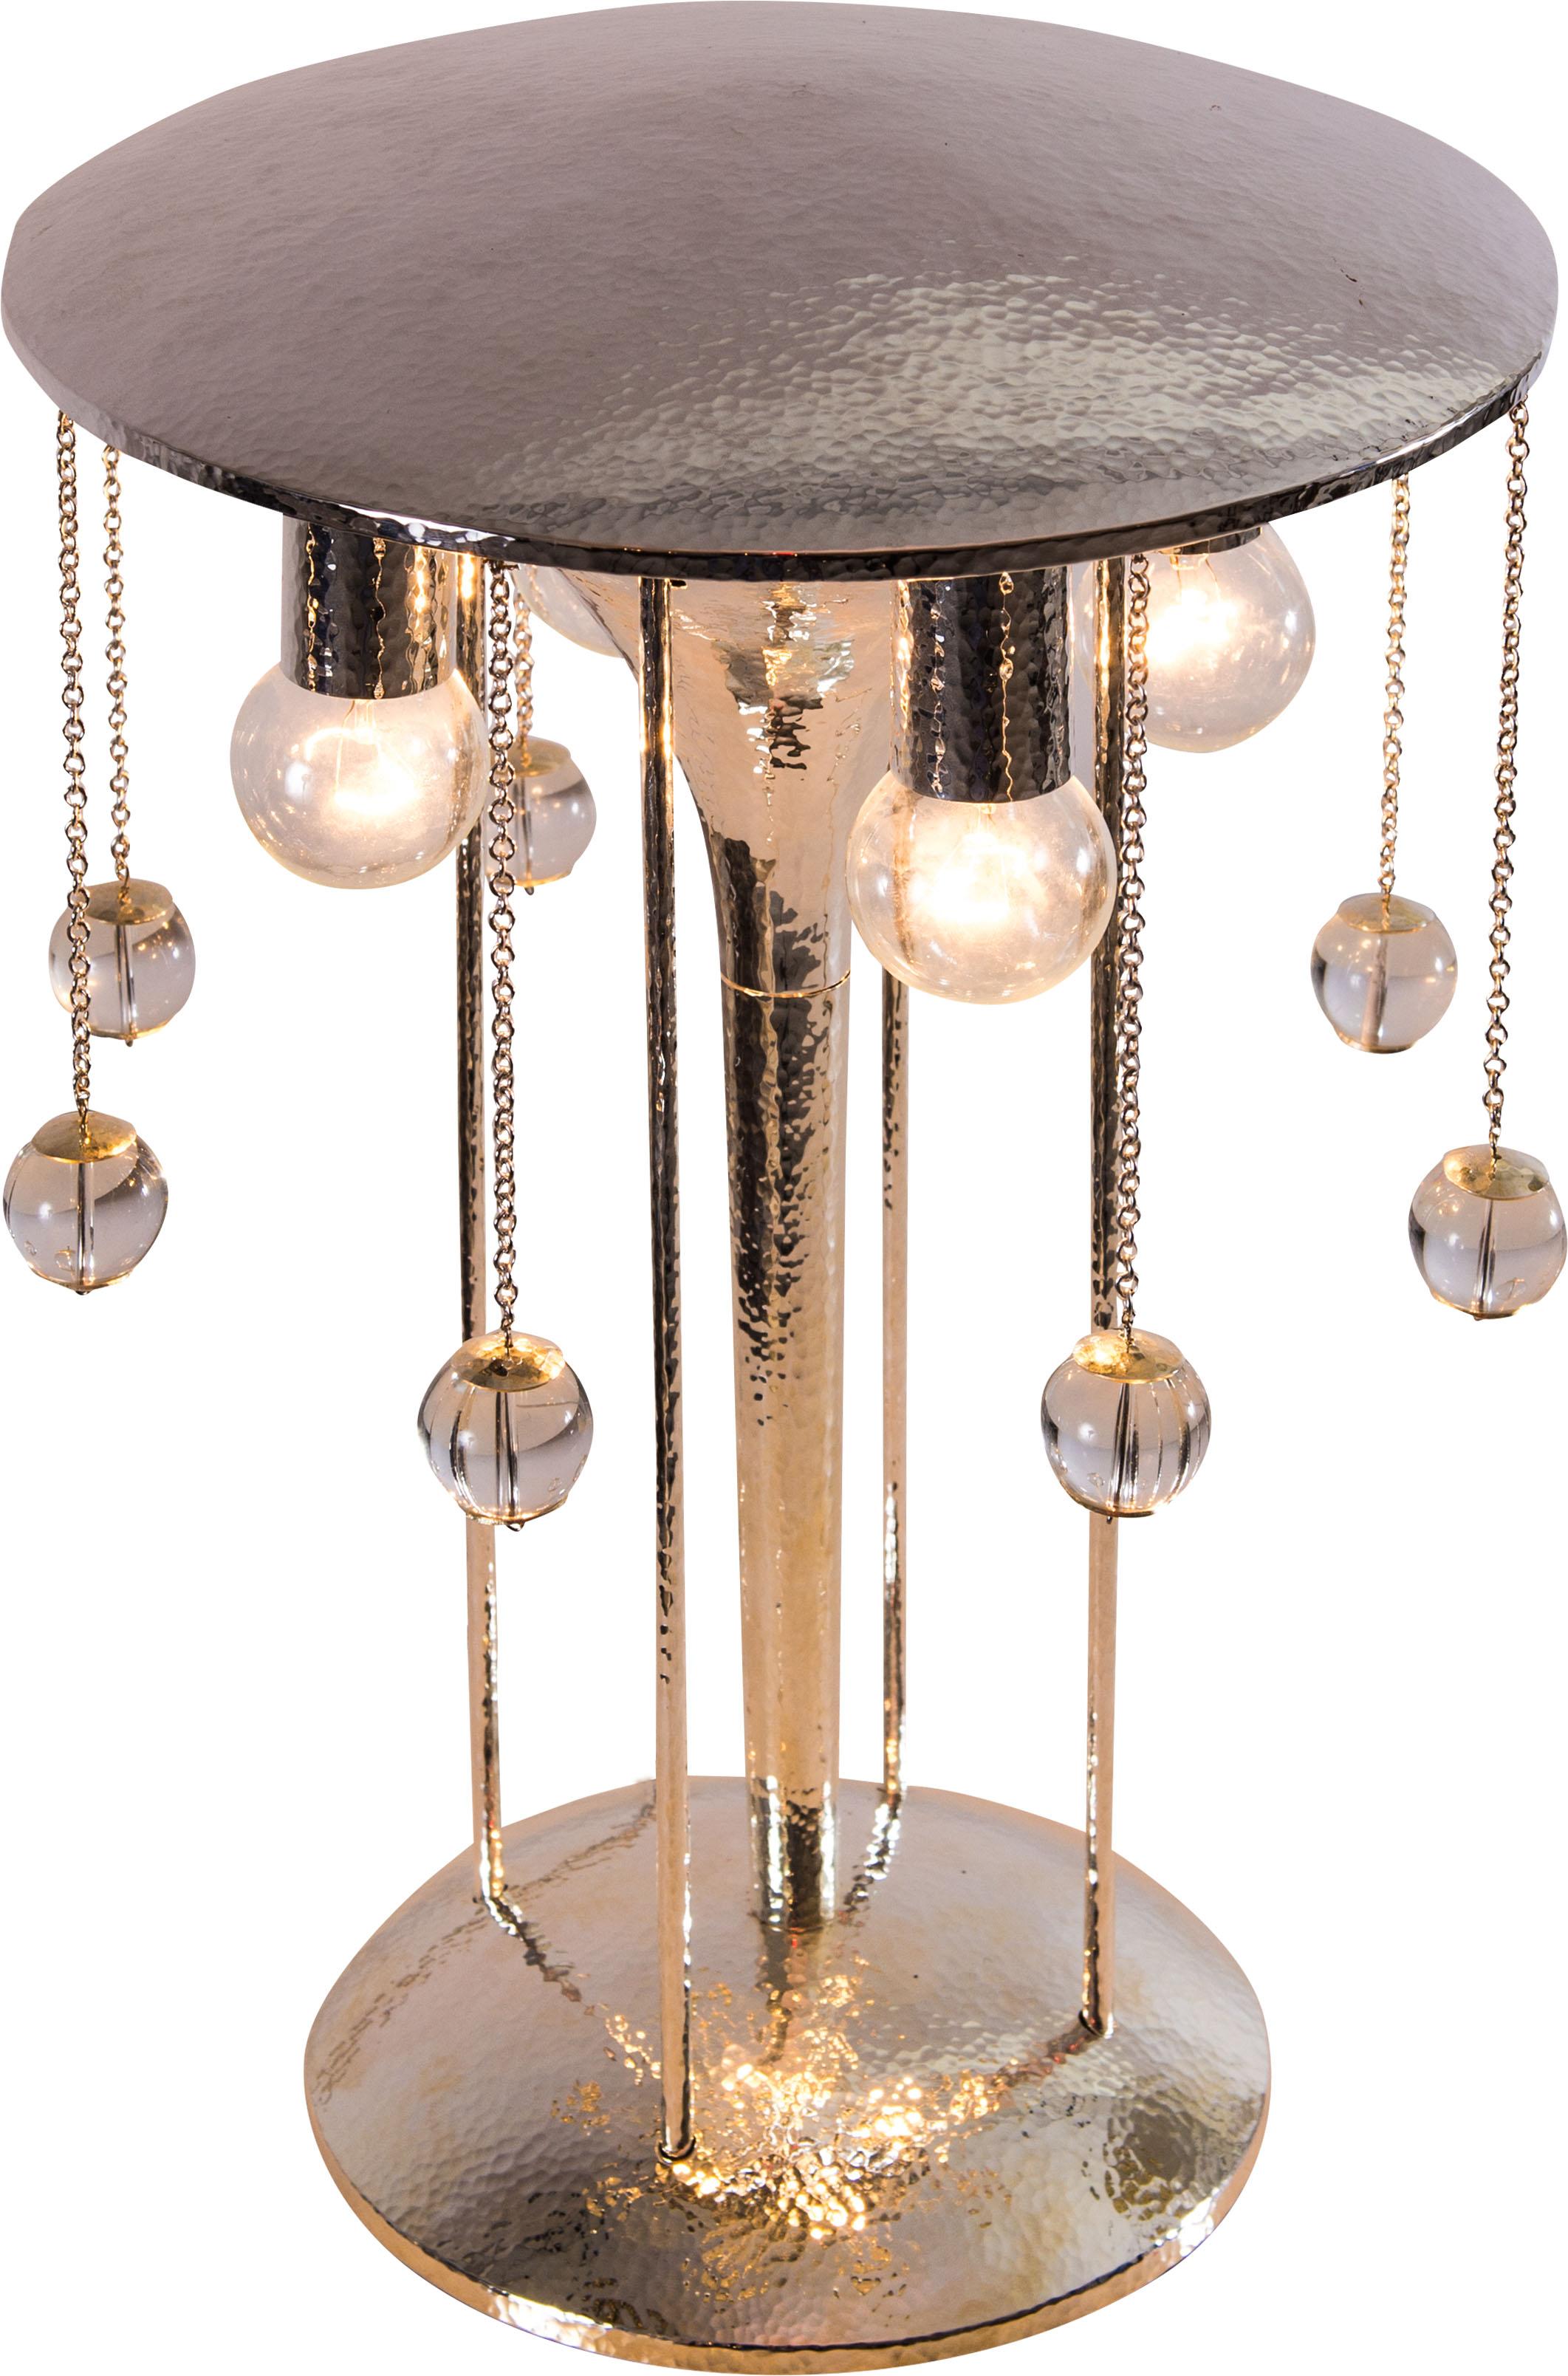 Wonderful, very elaberate table lamp, silvered brass, the original is displayed in gallery 910 at the Metropolitan Museum New York. Also available in a plain, non-wrought version.
Material used is silvered brass, hammered.
Originally manufactured at